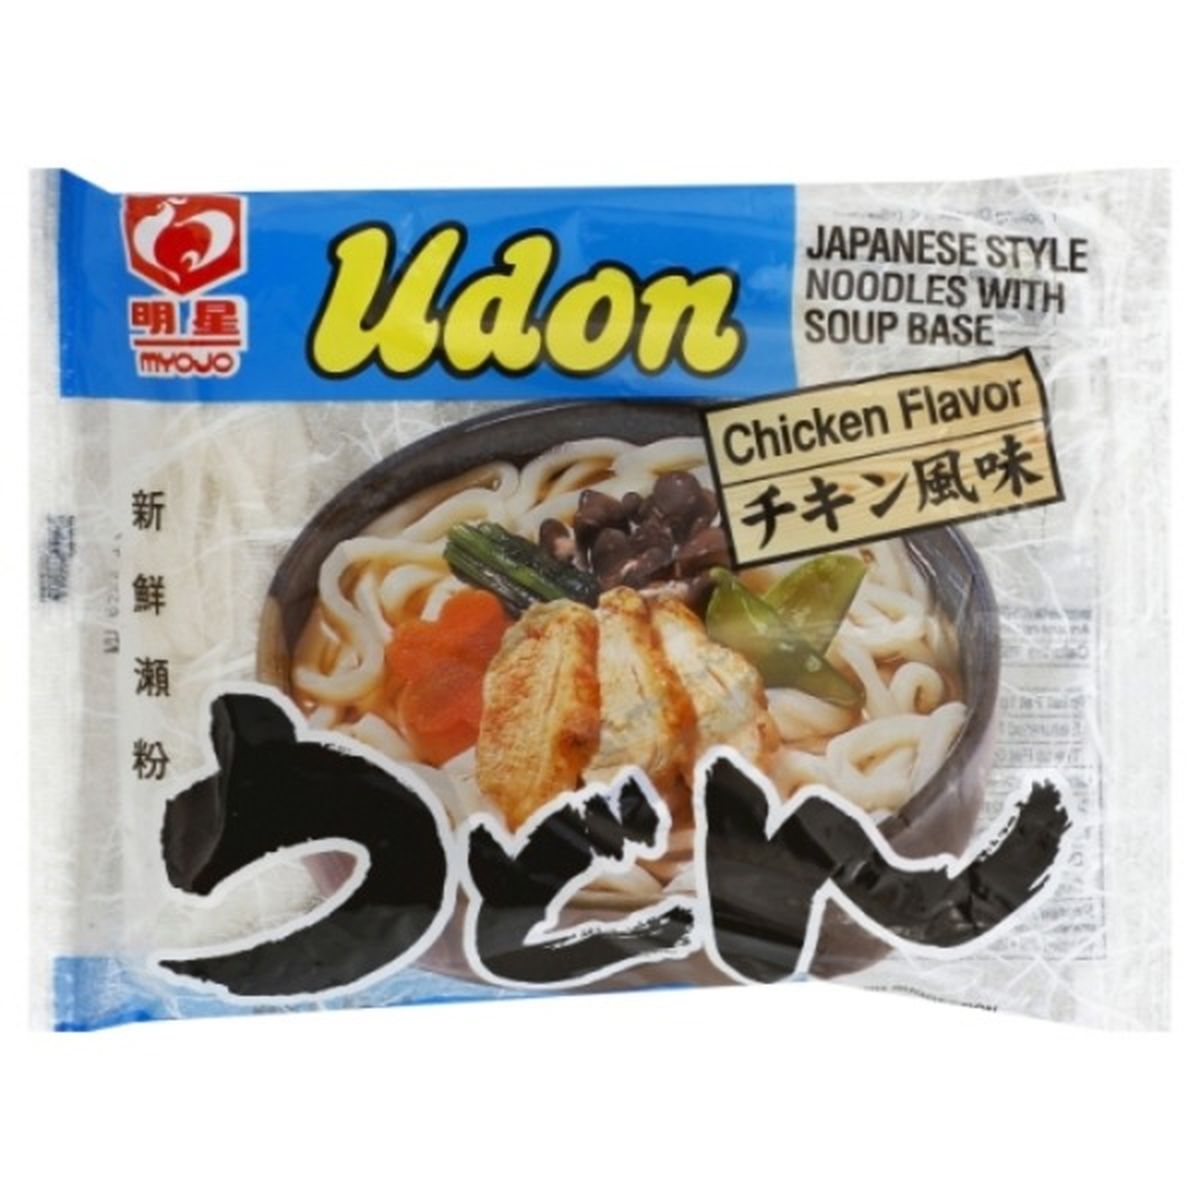 Calories in Myojo Japanese Style Noodles, with Soup Base, Chicken Flavor